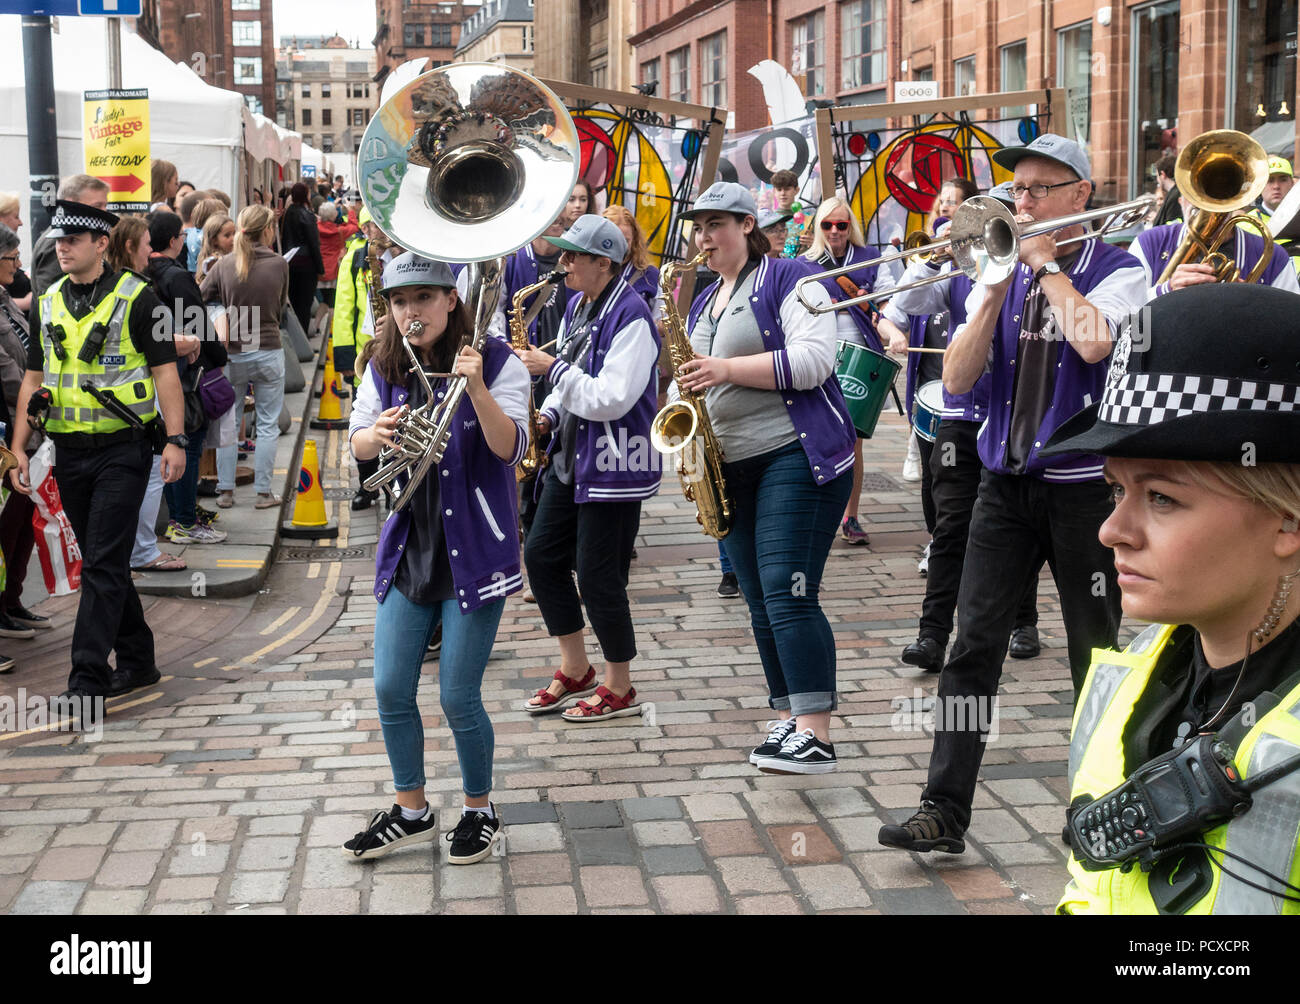 Glasgow, Scotland, UK. 04th August 2018. Police officers accompany participants in the Carnival Procession of the Merchant City Festival. Shown are the Baybeat Street band, and behind them people carrying 'stained glass windows' of the Mackintosh Rose. The festival is part of Festival 2018 a city-wide cultural event running in parallel with Glasgow 2018, the European Championships. Credit: Elizabeth Leyden/Alamy Live News Stock Photo